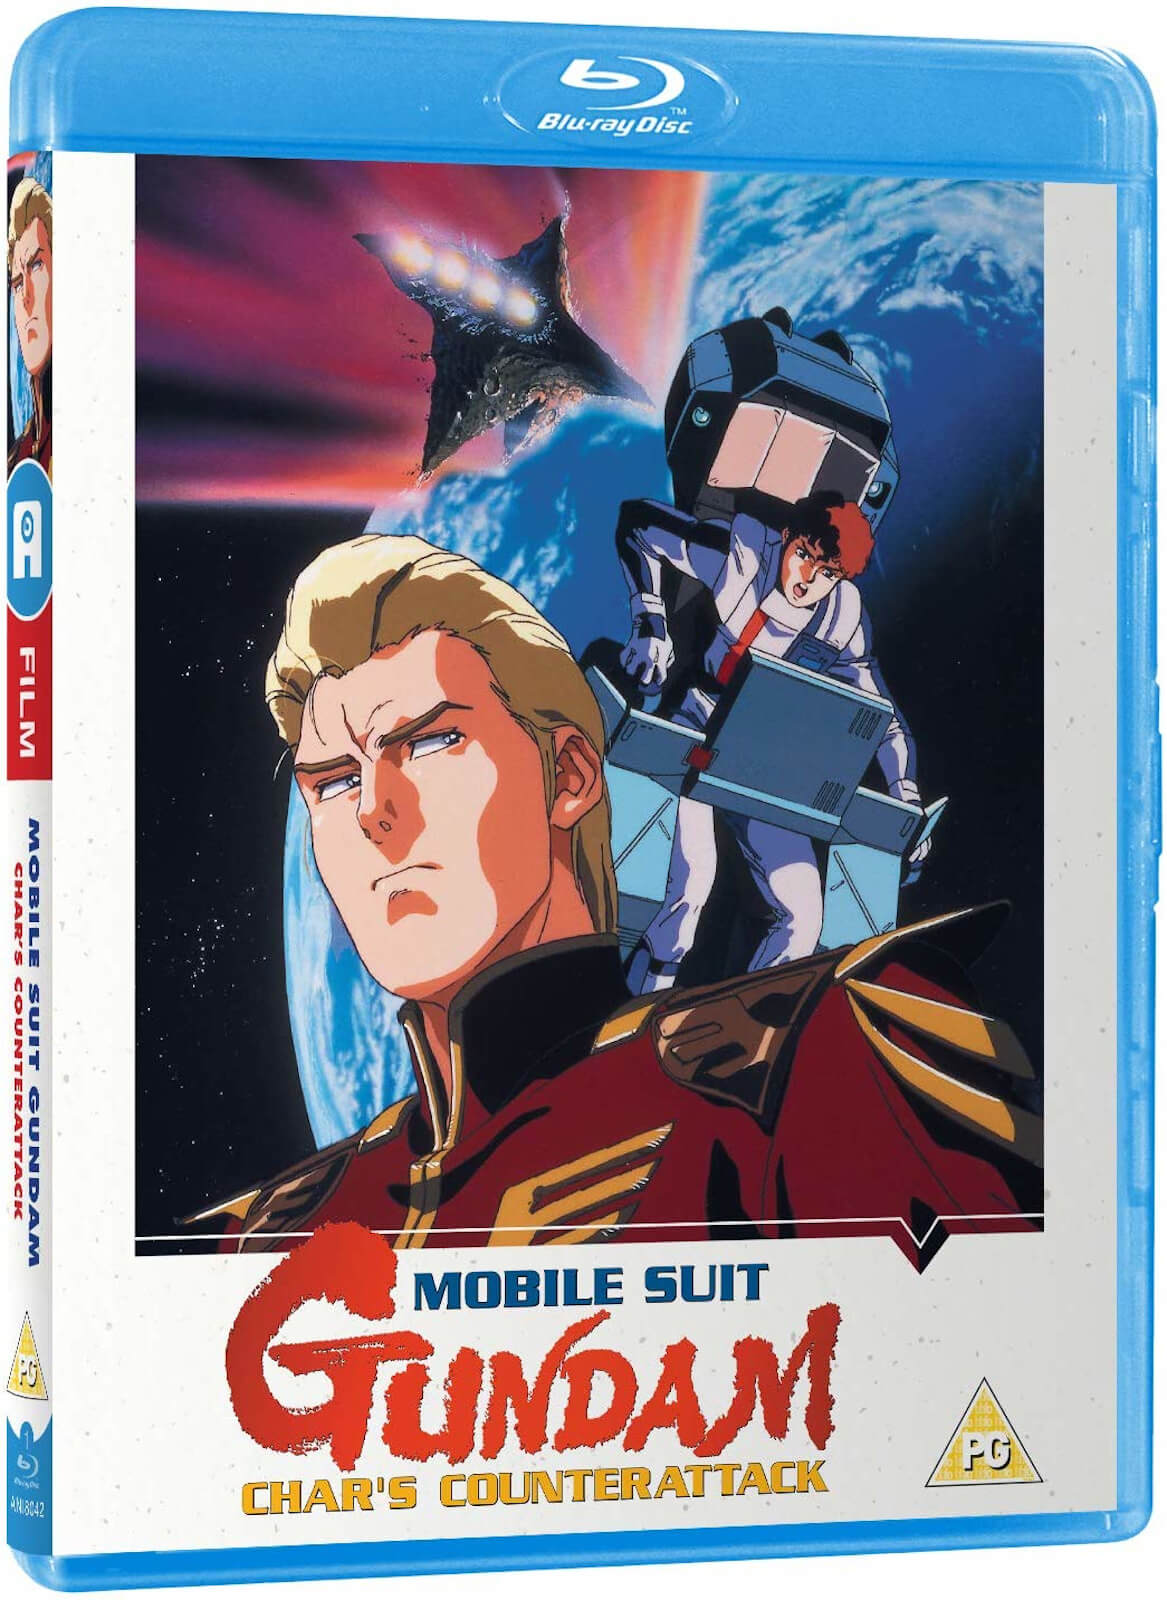 Mobile Suit Gundam Char’s Counter Attack